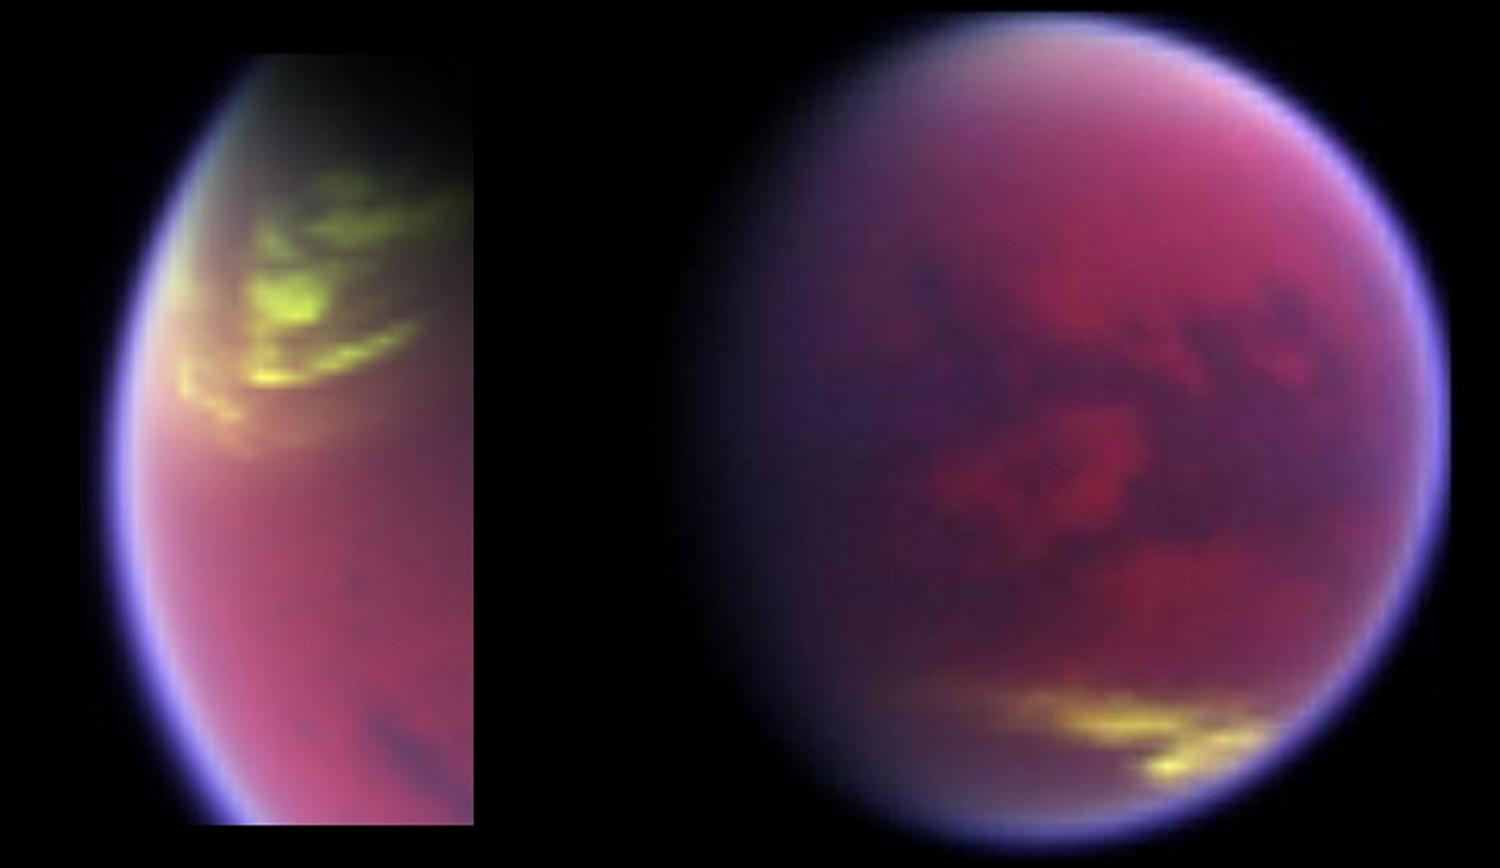 These two false-color images show clouds covering parts of Titan in yellow